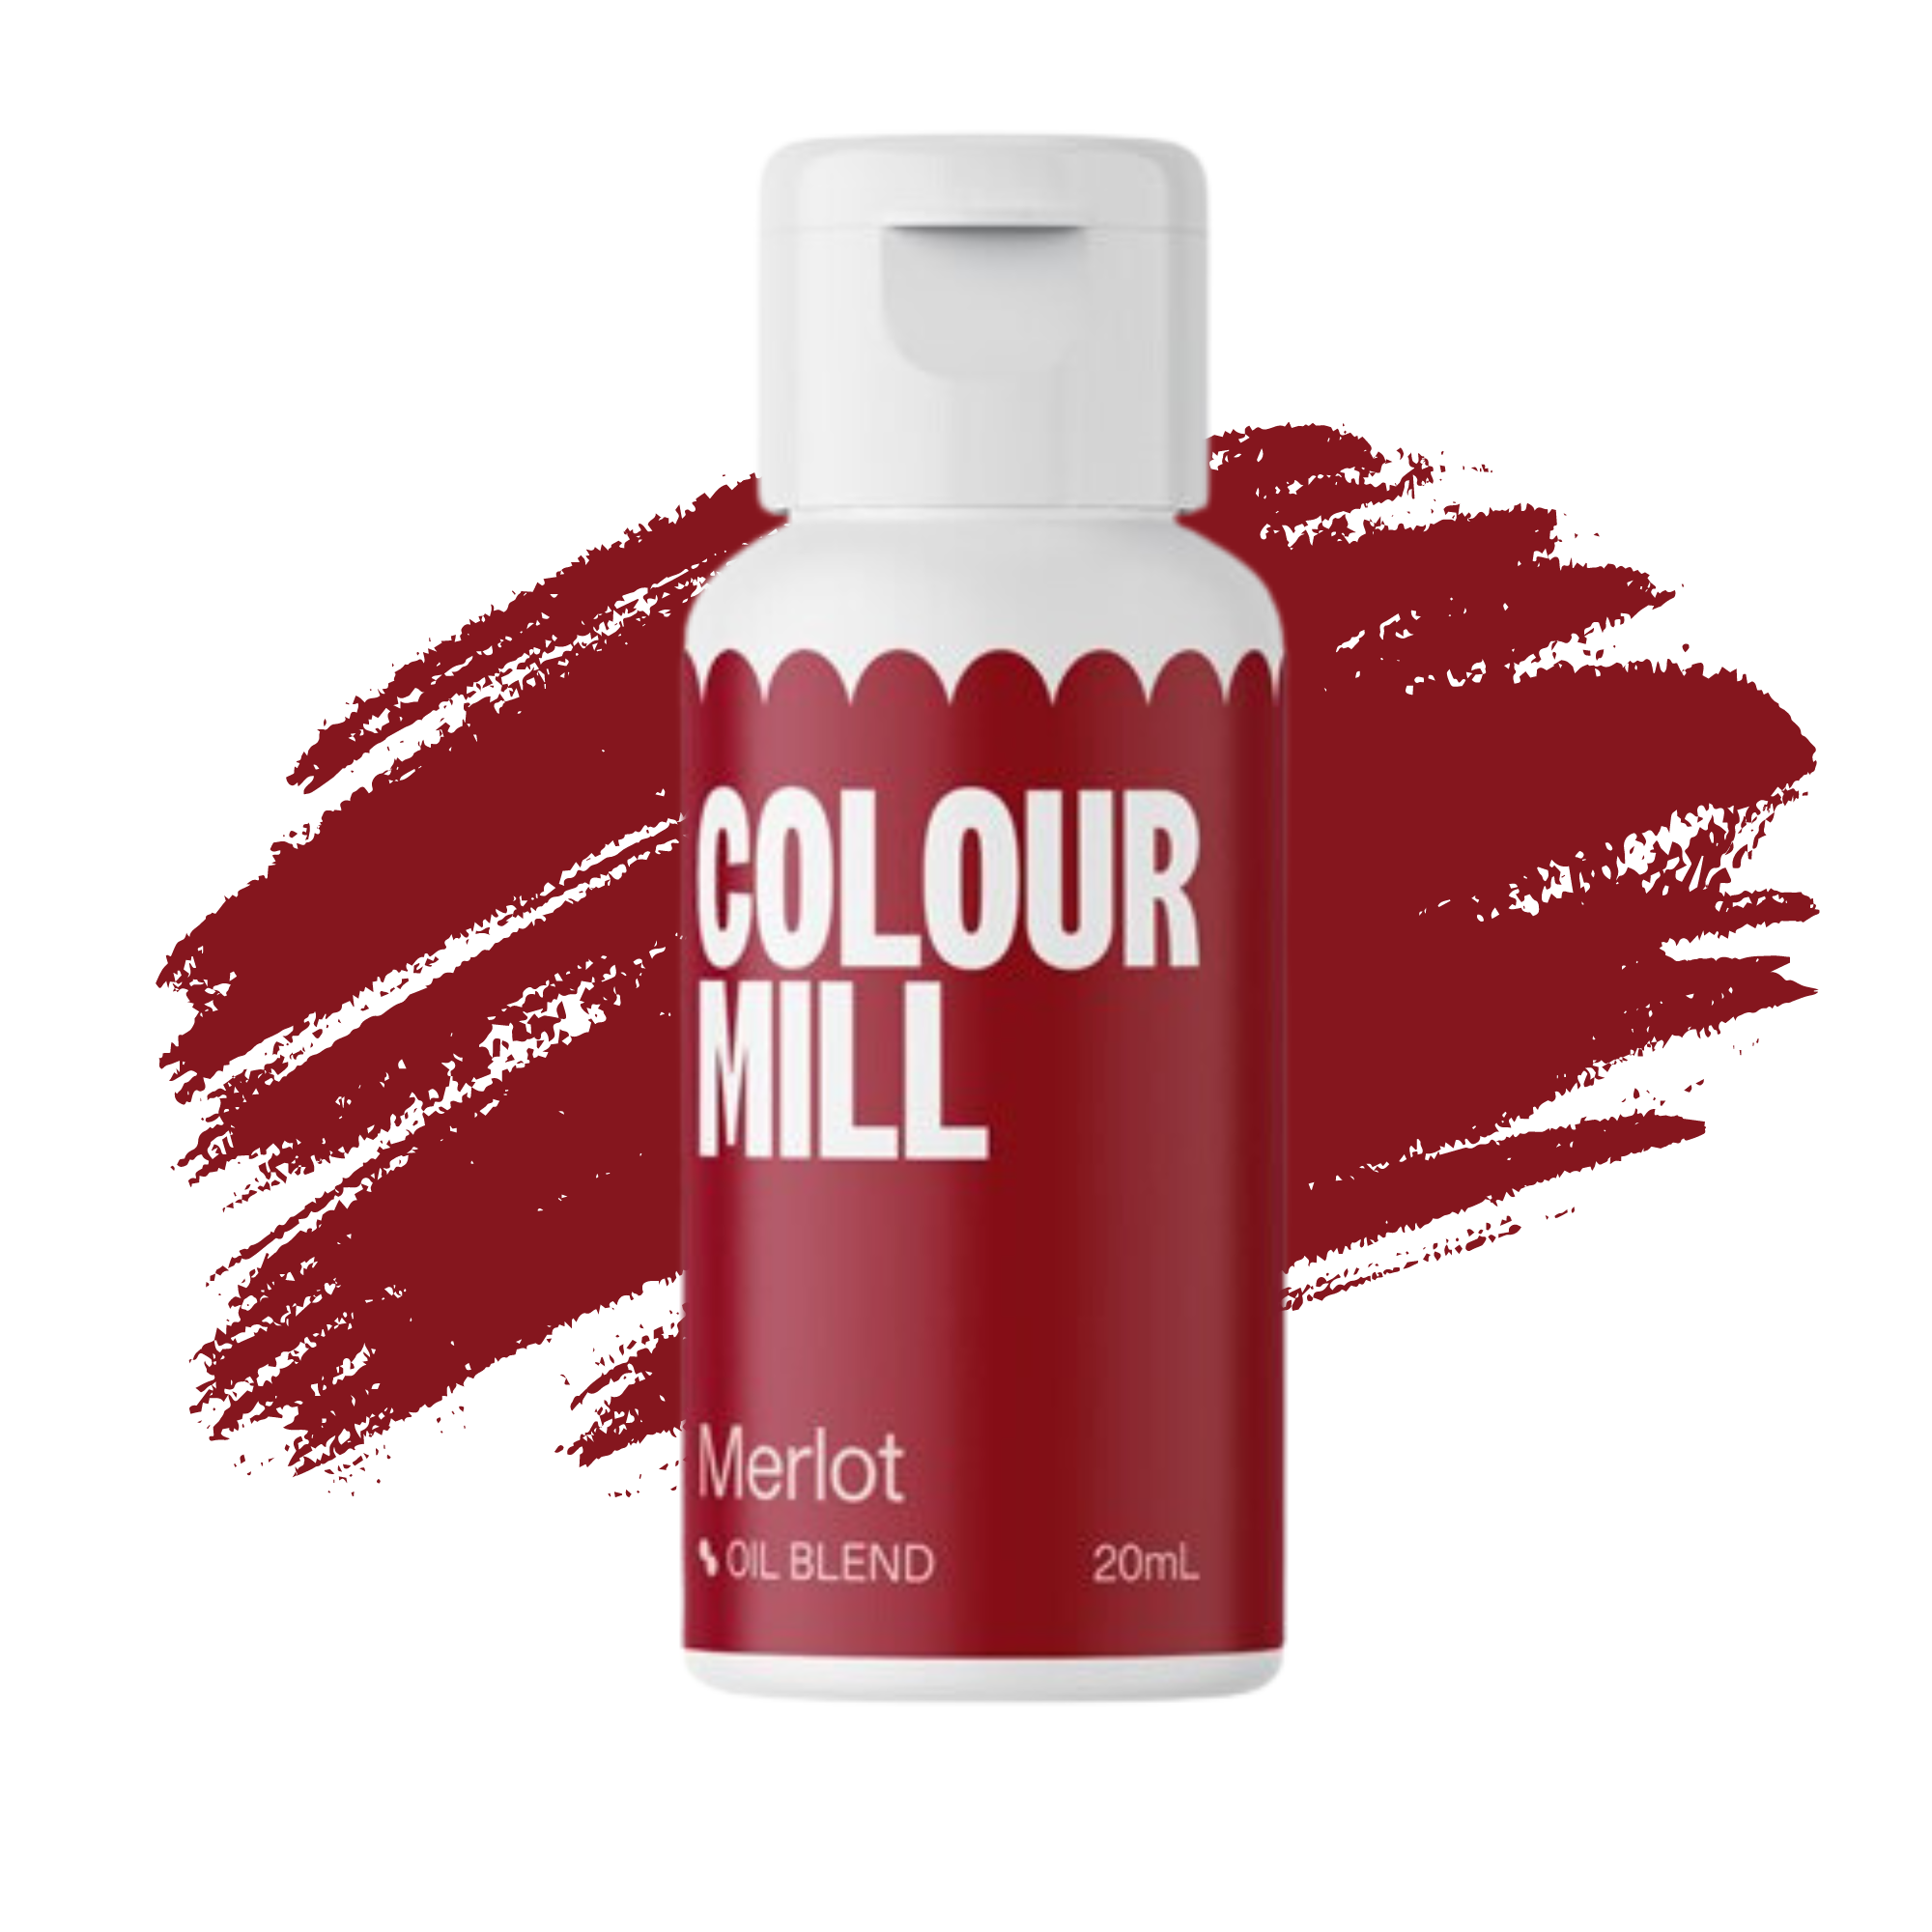 Colour Mill Merlot Food Colouring, Colour Mill Merlot, Oil Based Food Colouring, Colour Mill Food Colouring